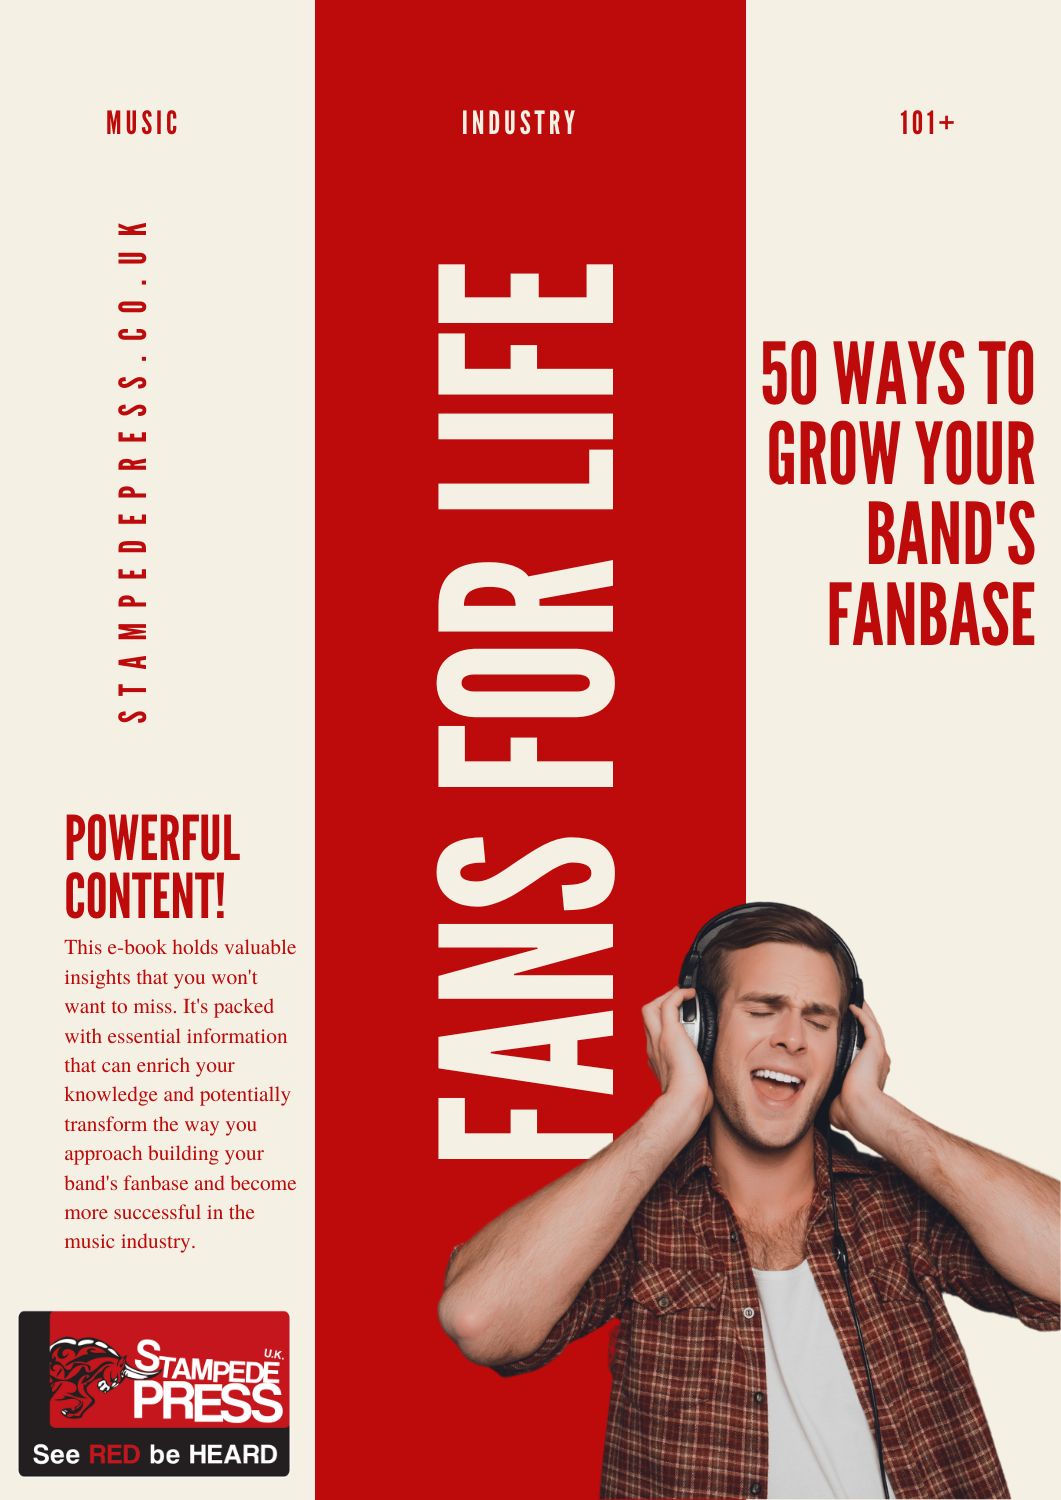 50 Way's To Grow Your Band's Fanbase